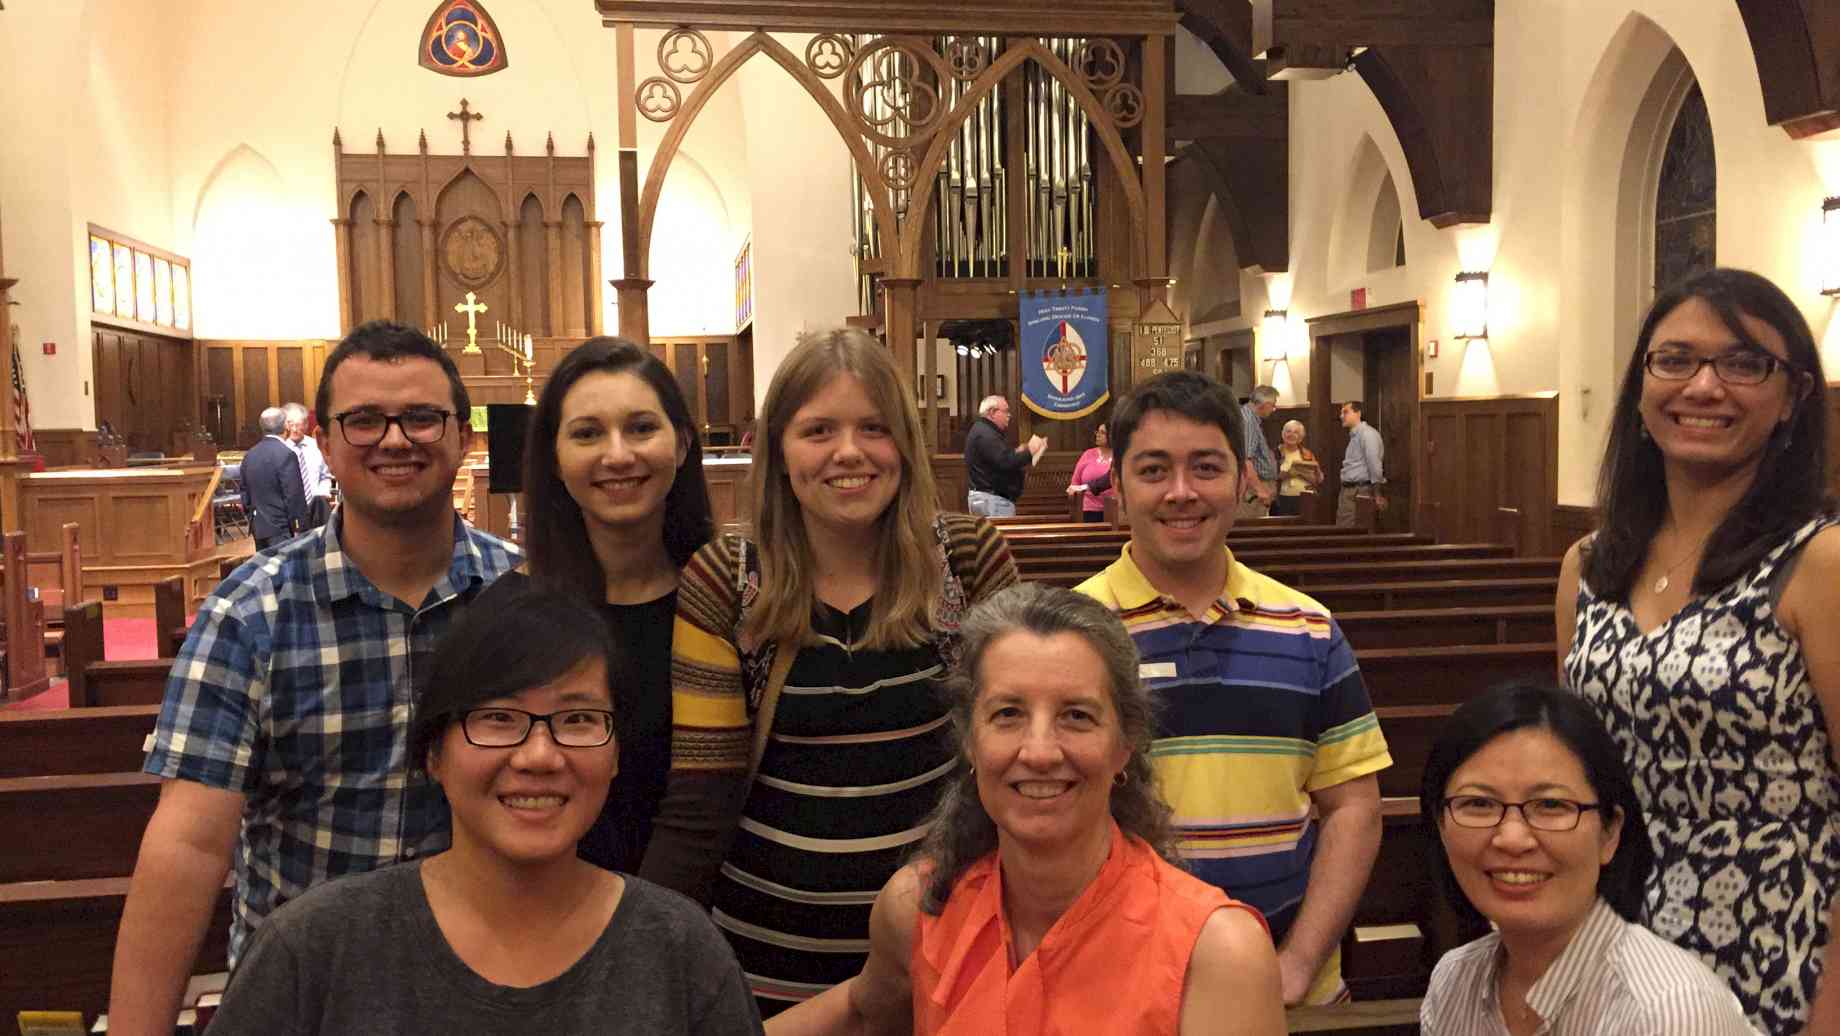 Current and former UF studio members attend a recital at Holy Trinity, 9-23-16